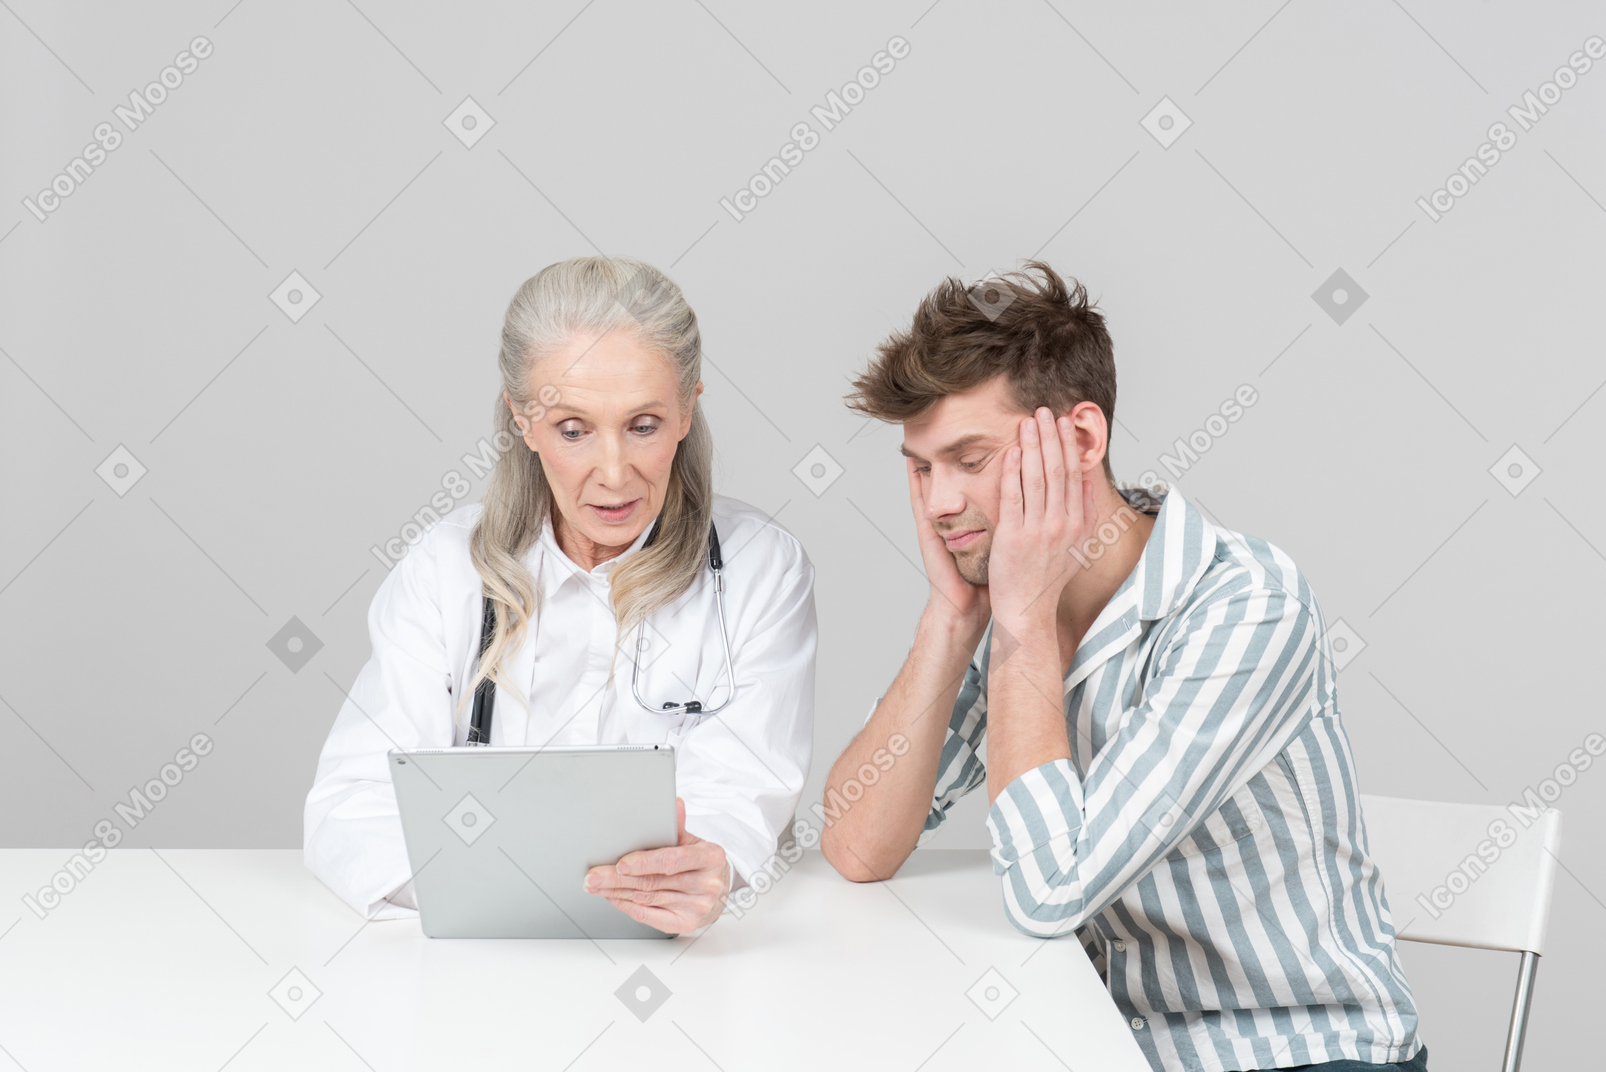 Aged female doctor showing something on her digital tablet to a patient